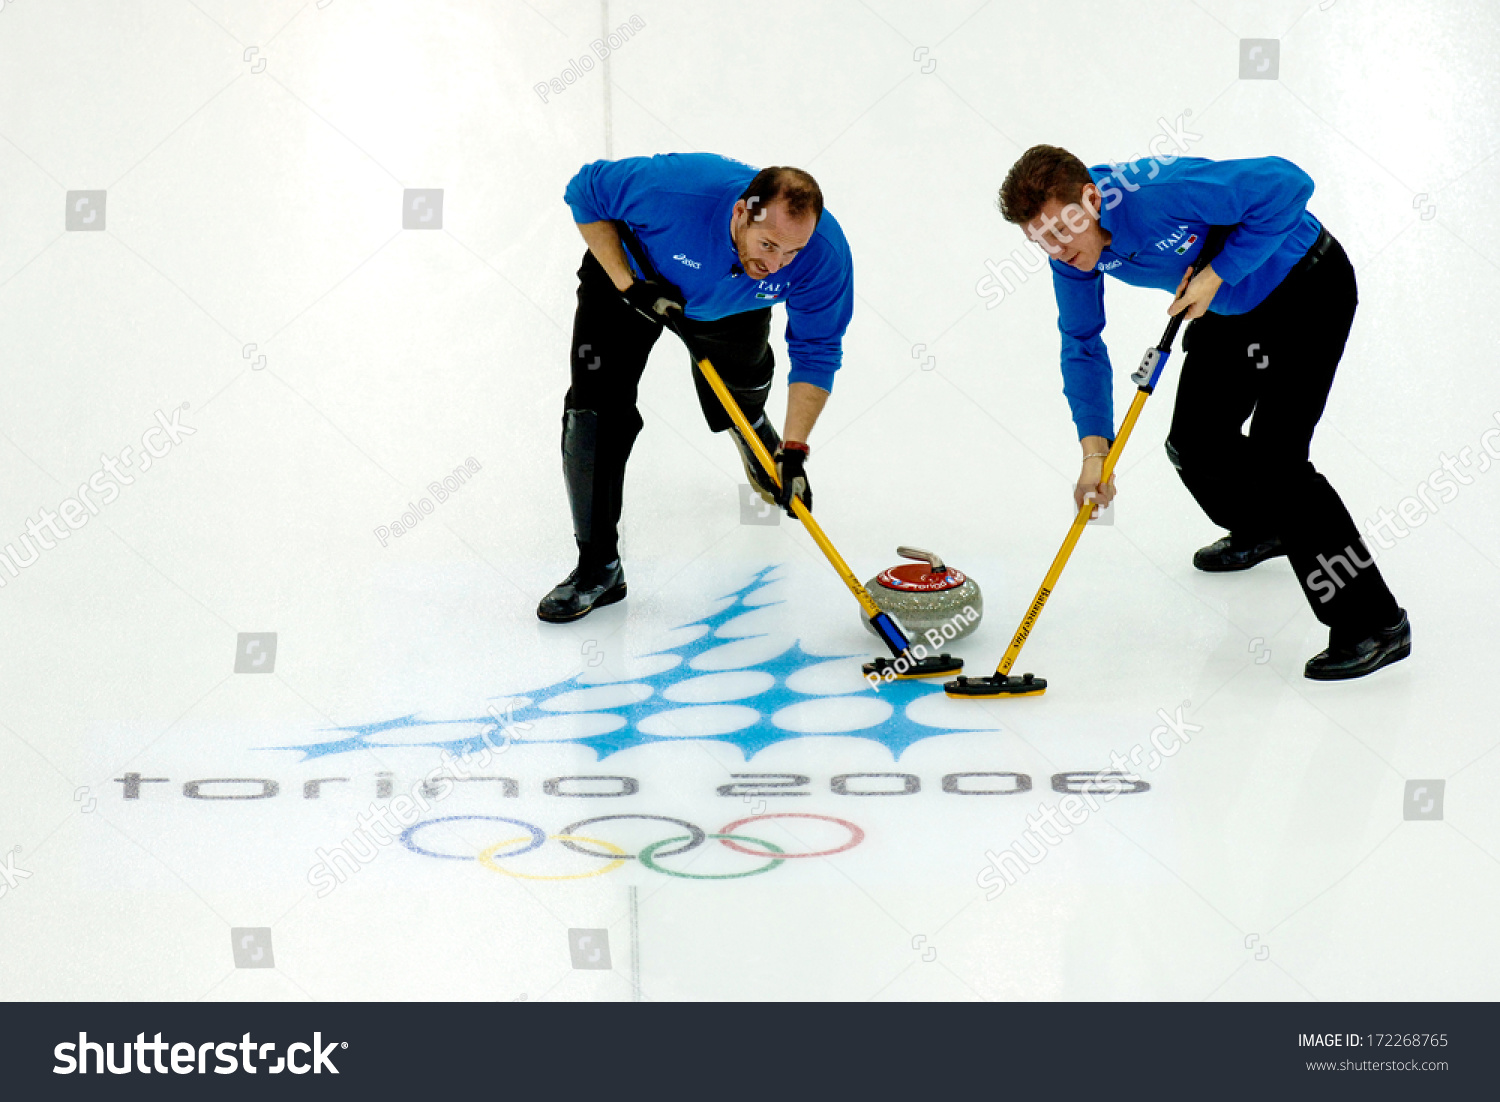 Turin, Italy - March 28: Players Of The Italian Team During A Curling ...